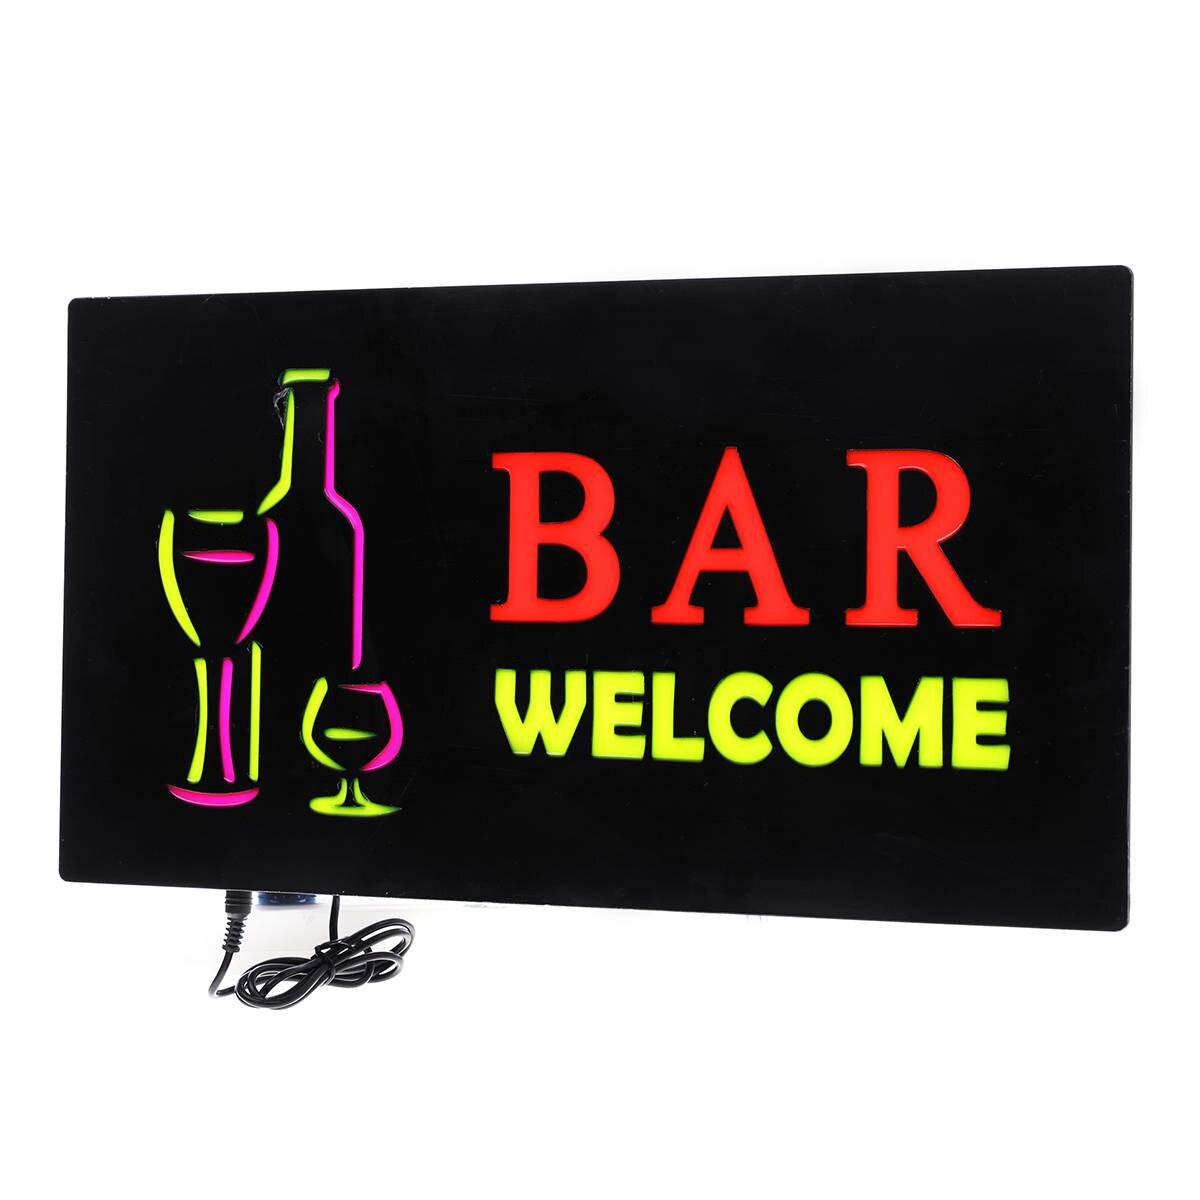 BAR Welcome LED Hanging Sign Light Board Pub Store Door Window Display Lamp Party Decoration Advertising Commercial Lighting